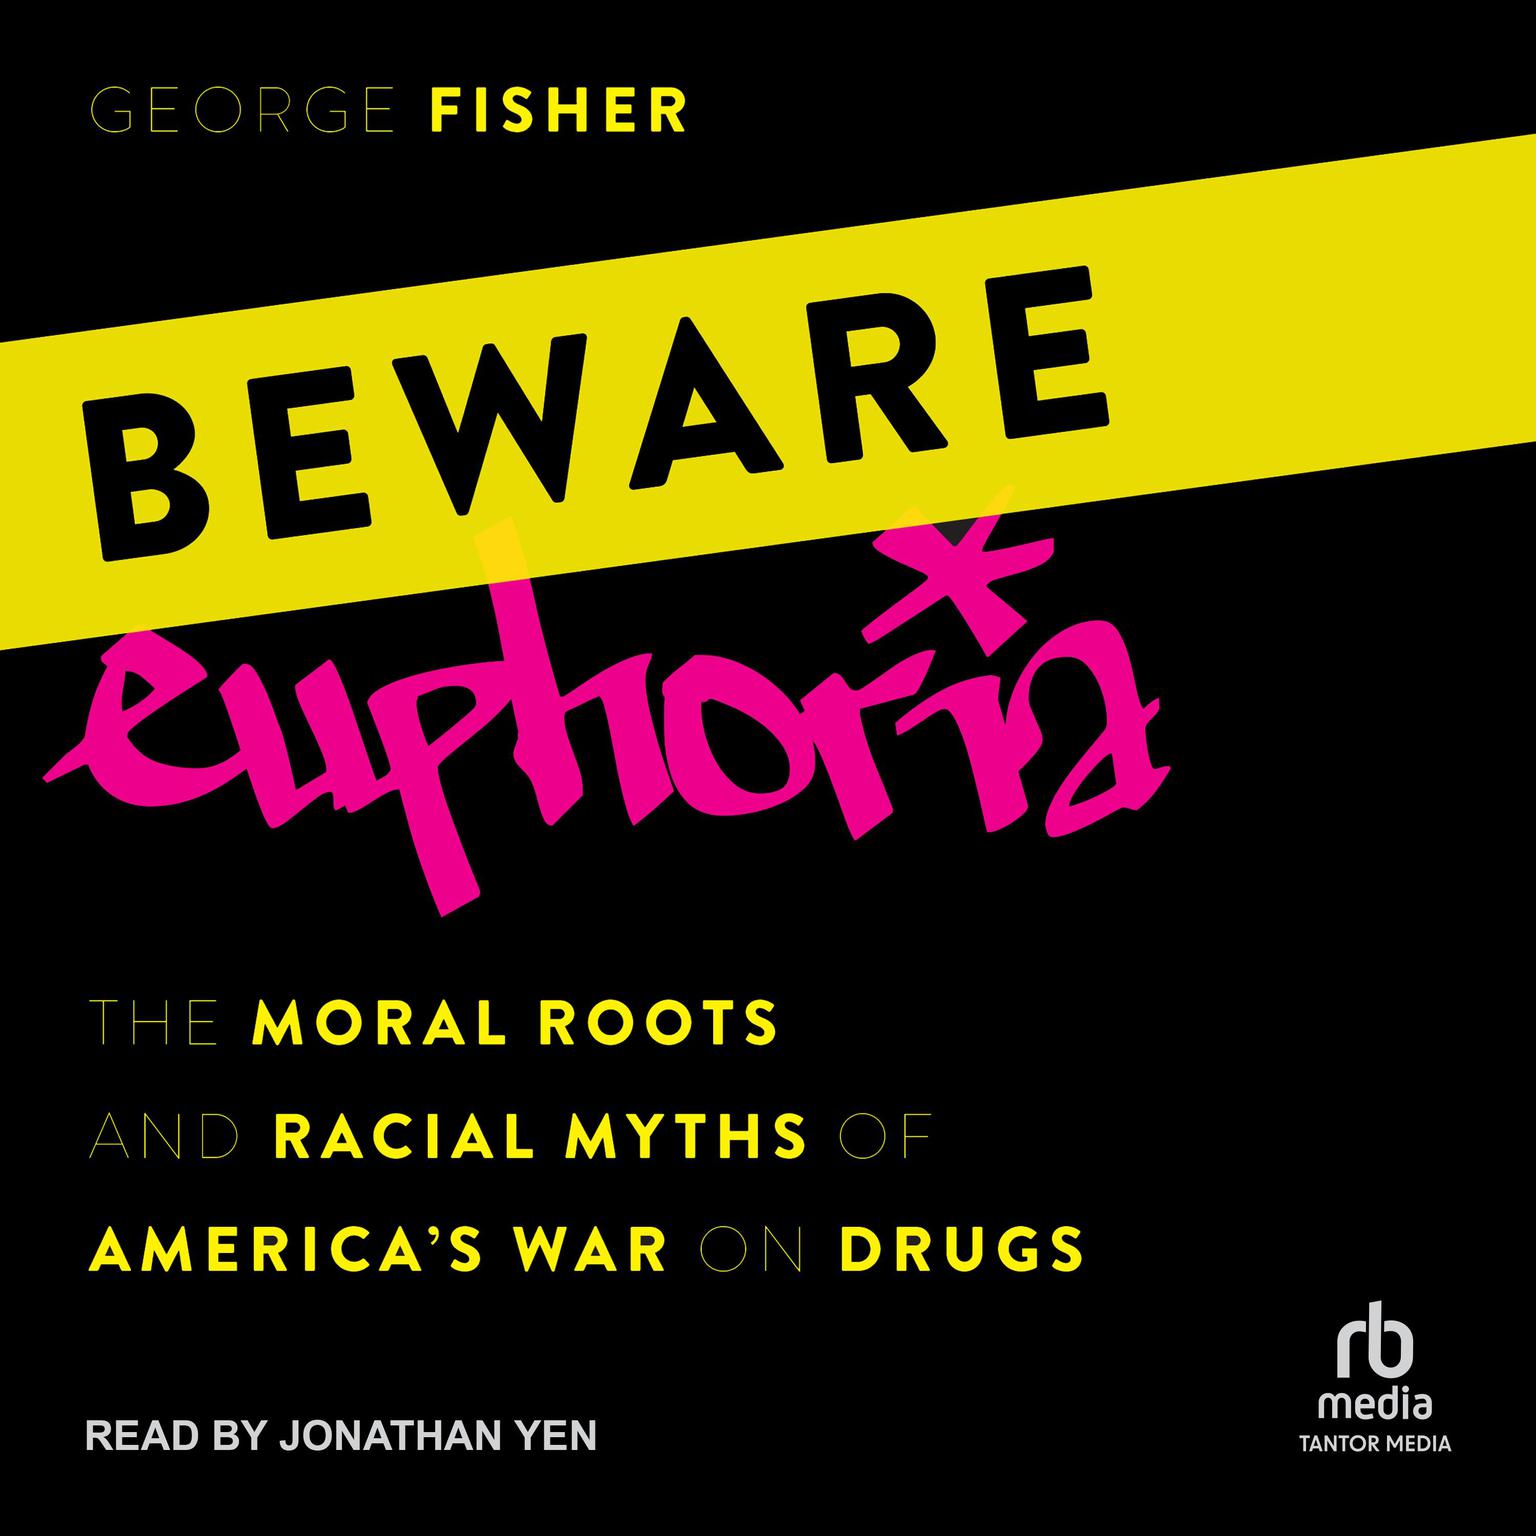 Beware Euphoria: The Moral Roots and Racial Myths of Americas War on Drugs Audiobook, by George Fisher